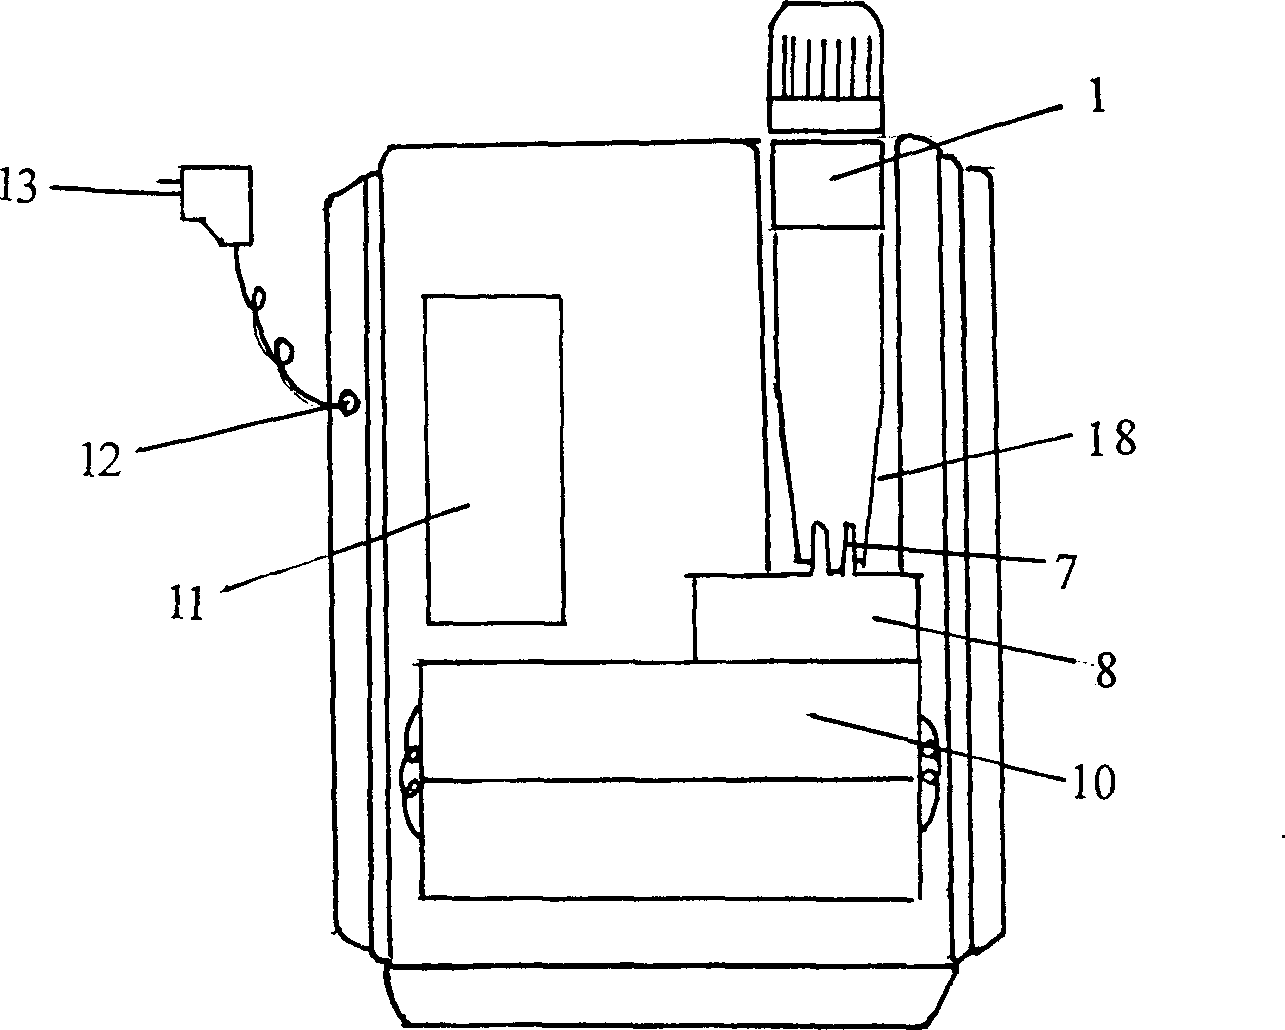 Base of semiconductor laser therapy apparatus